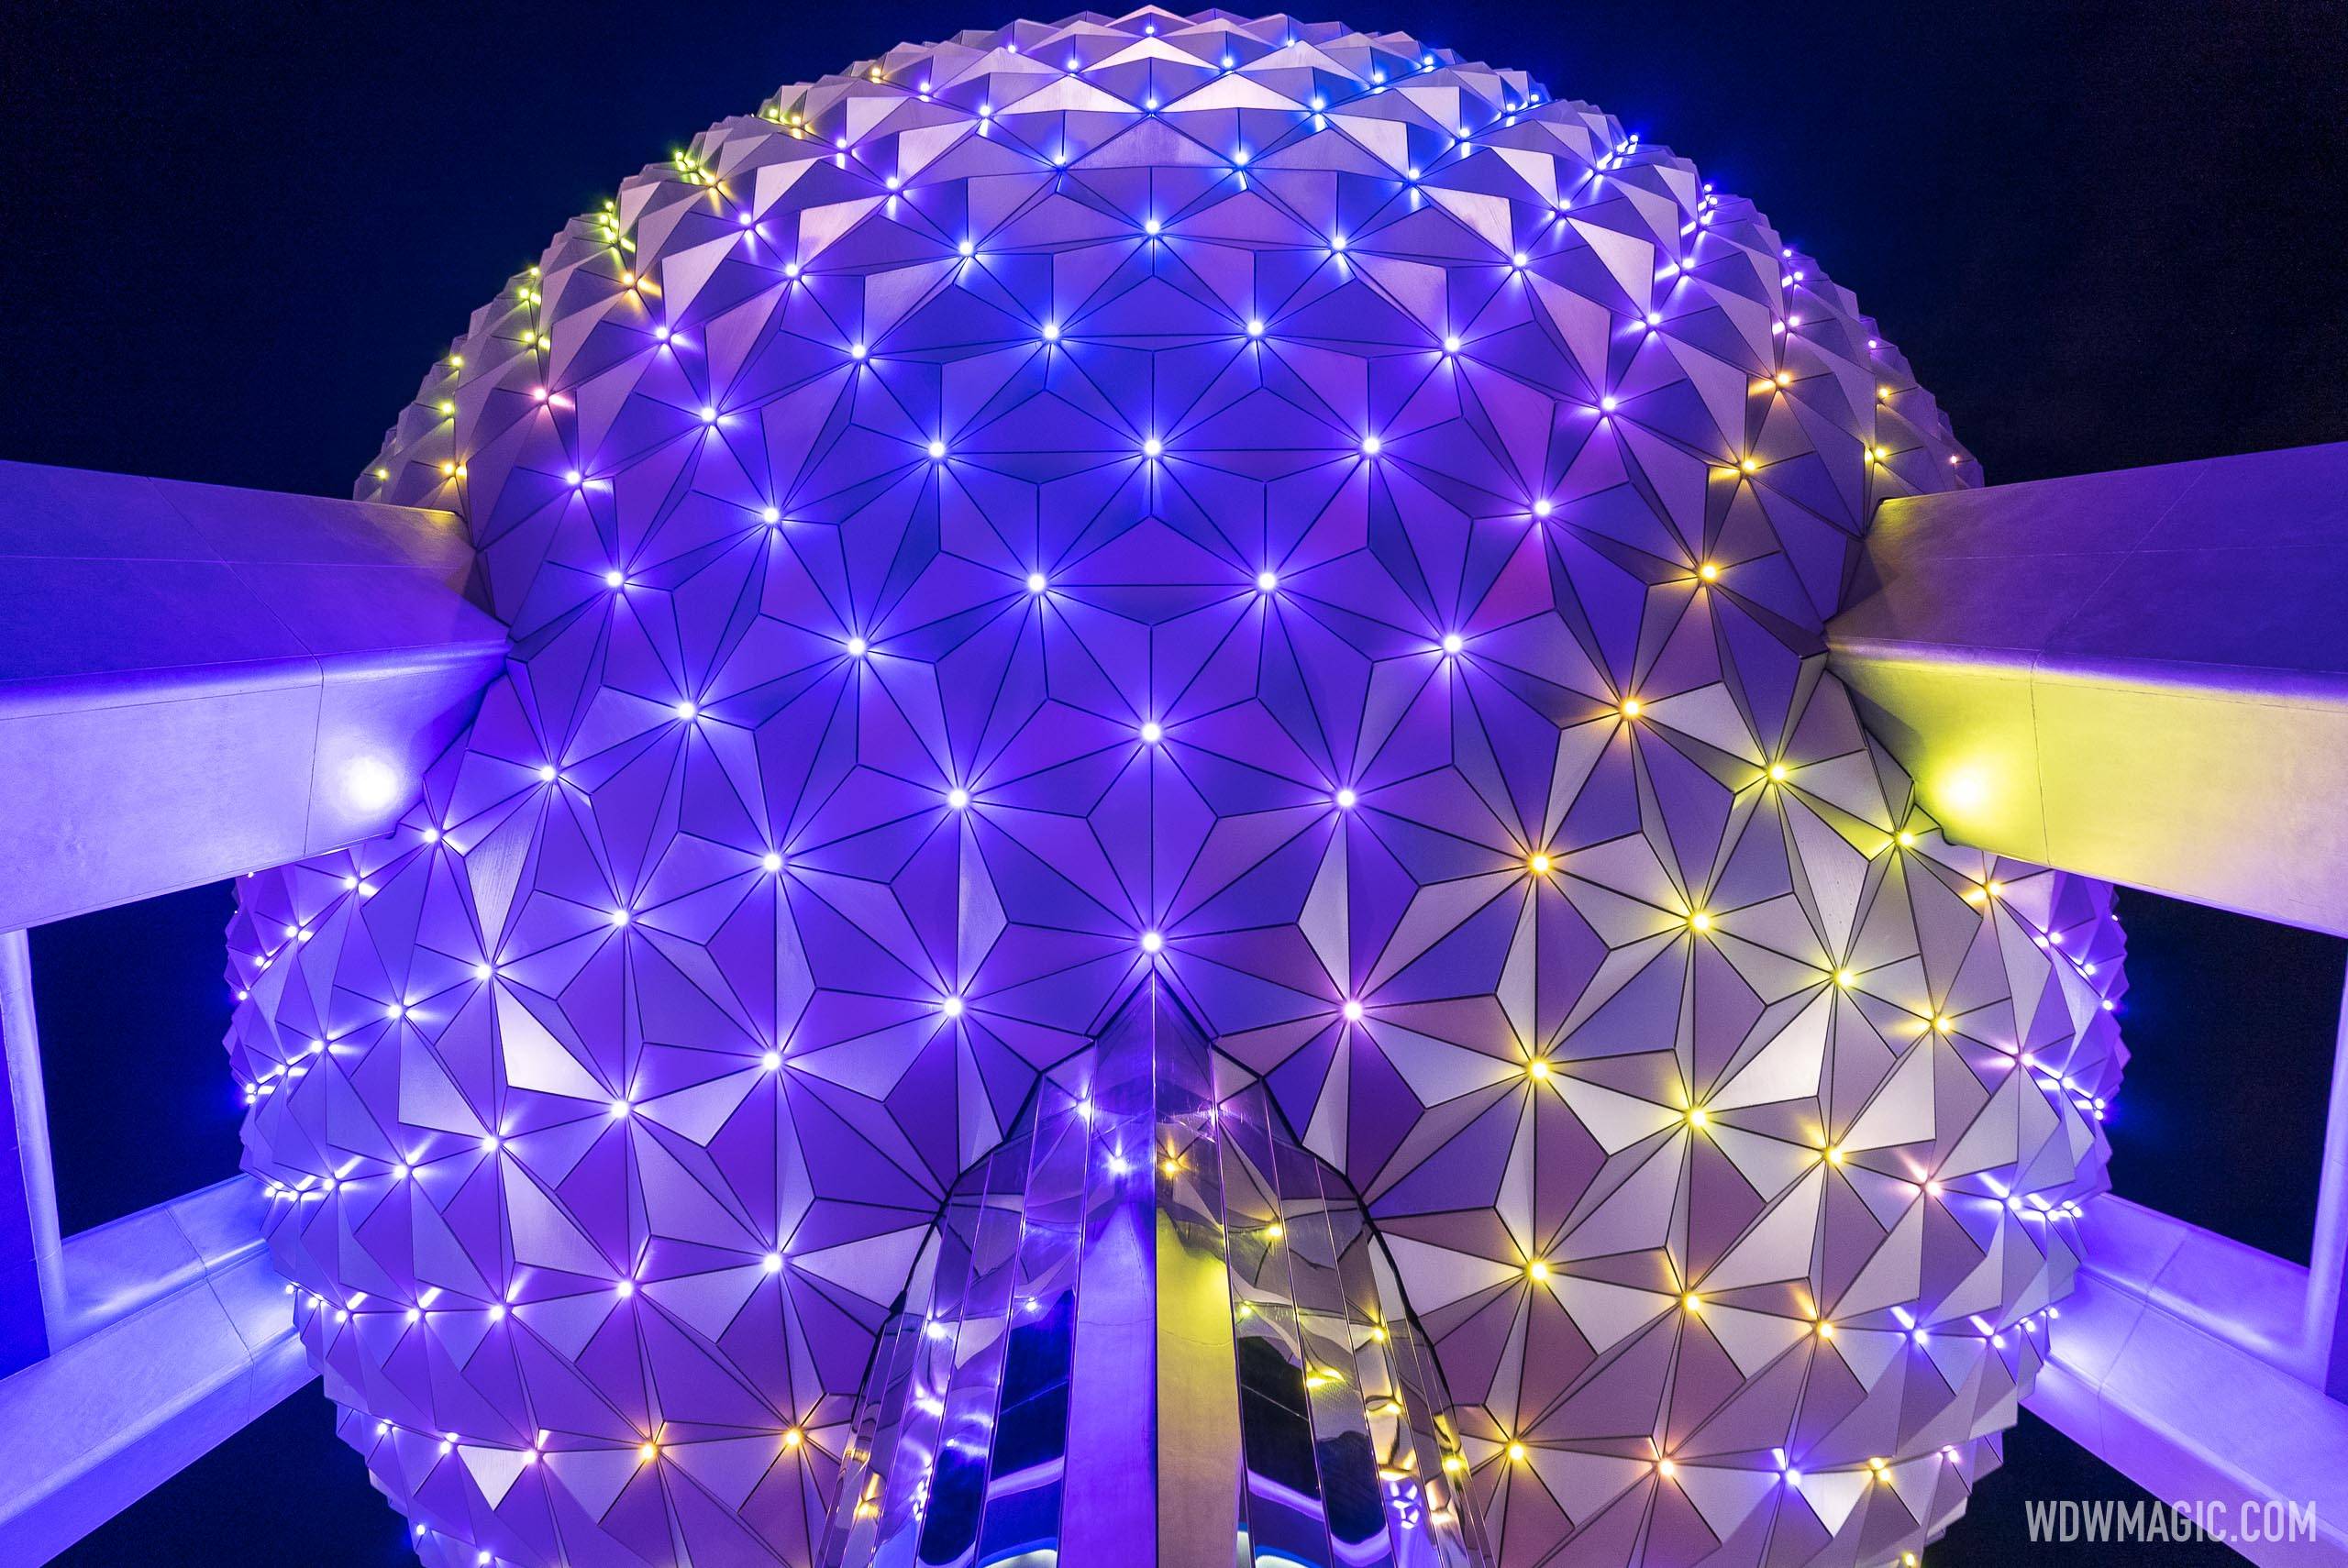 Spaceship Earth to feature holiday lighting patterns using the new points of light